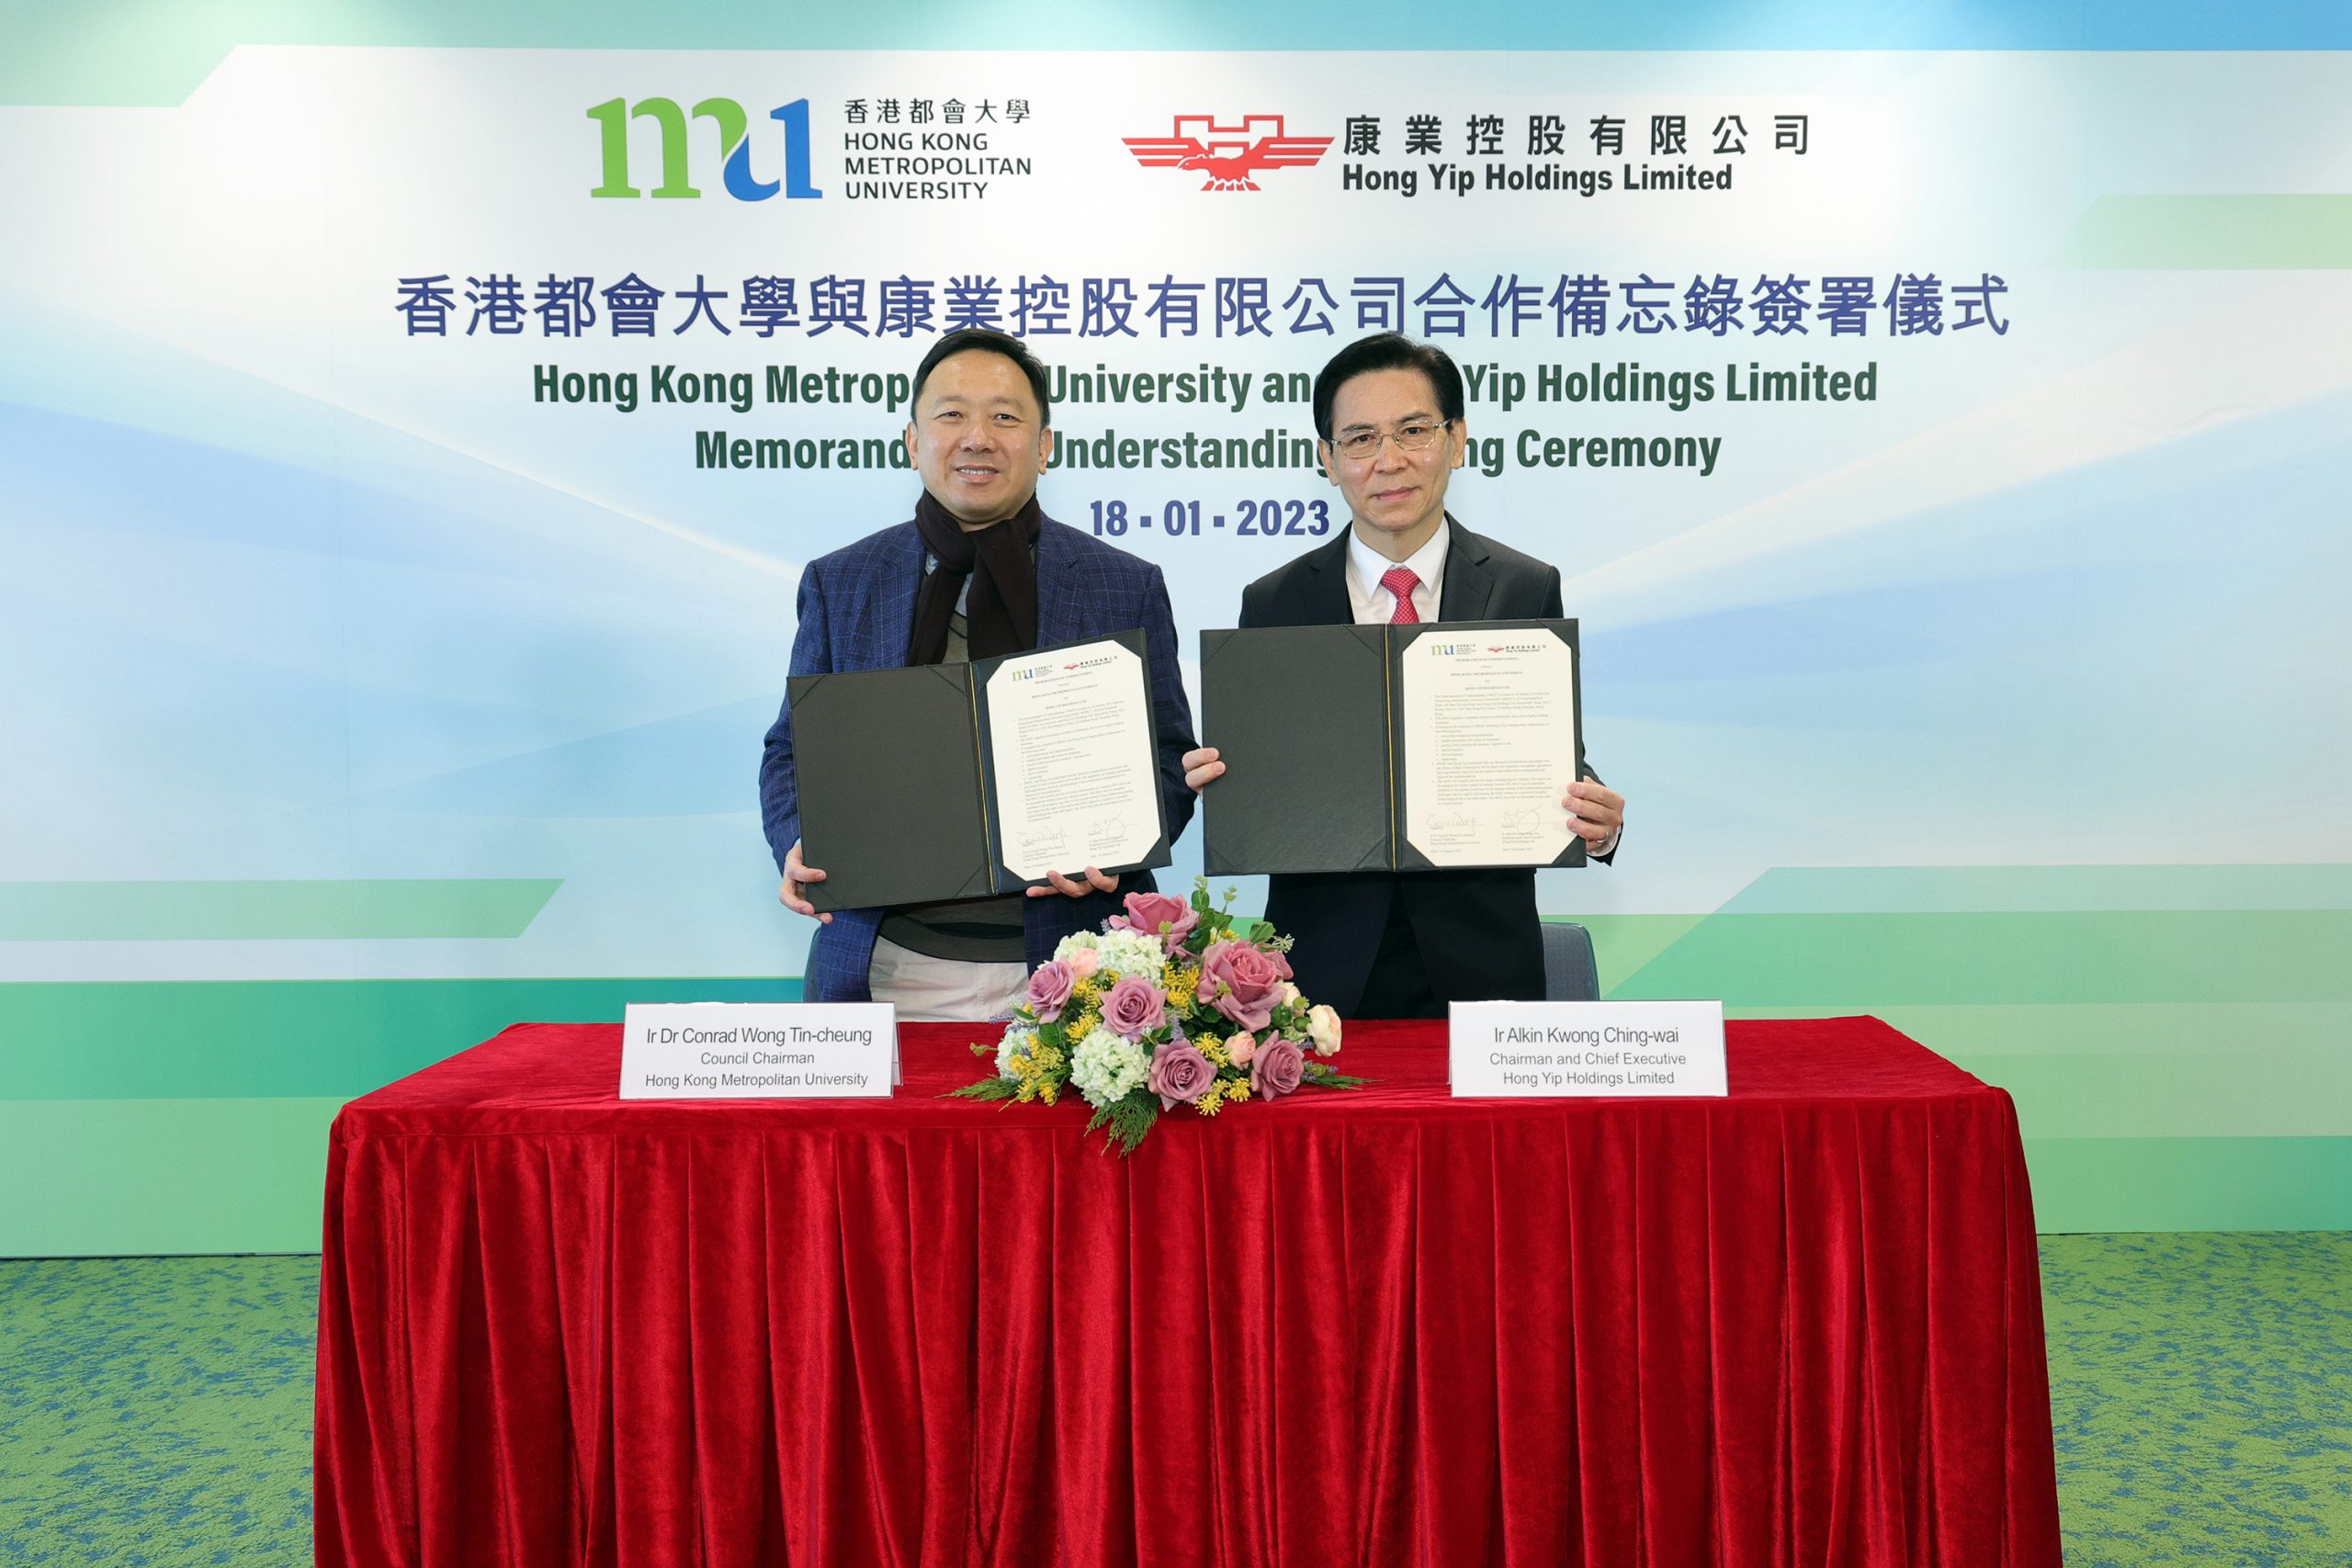 The MOU is signed by HKMU Council Chairman Ir Dr Conrad Wong Tin-cheung and Chairman and Chief Executive of Hong Yip Ir Alkin Kwong Ching-wai.